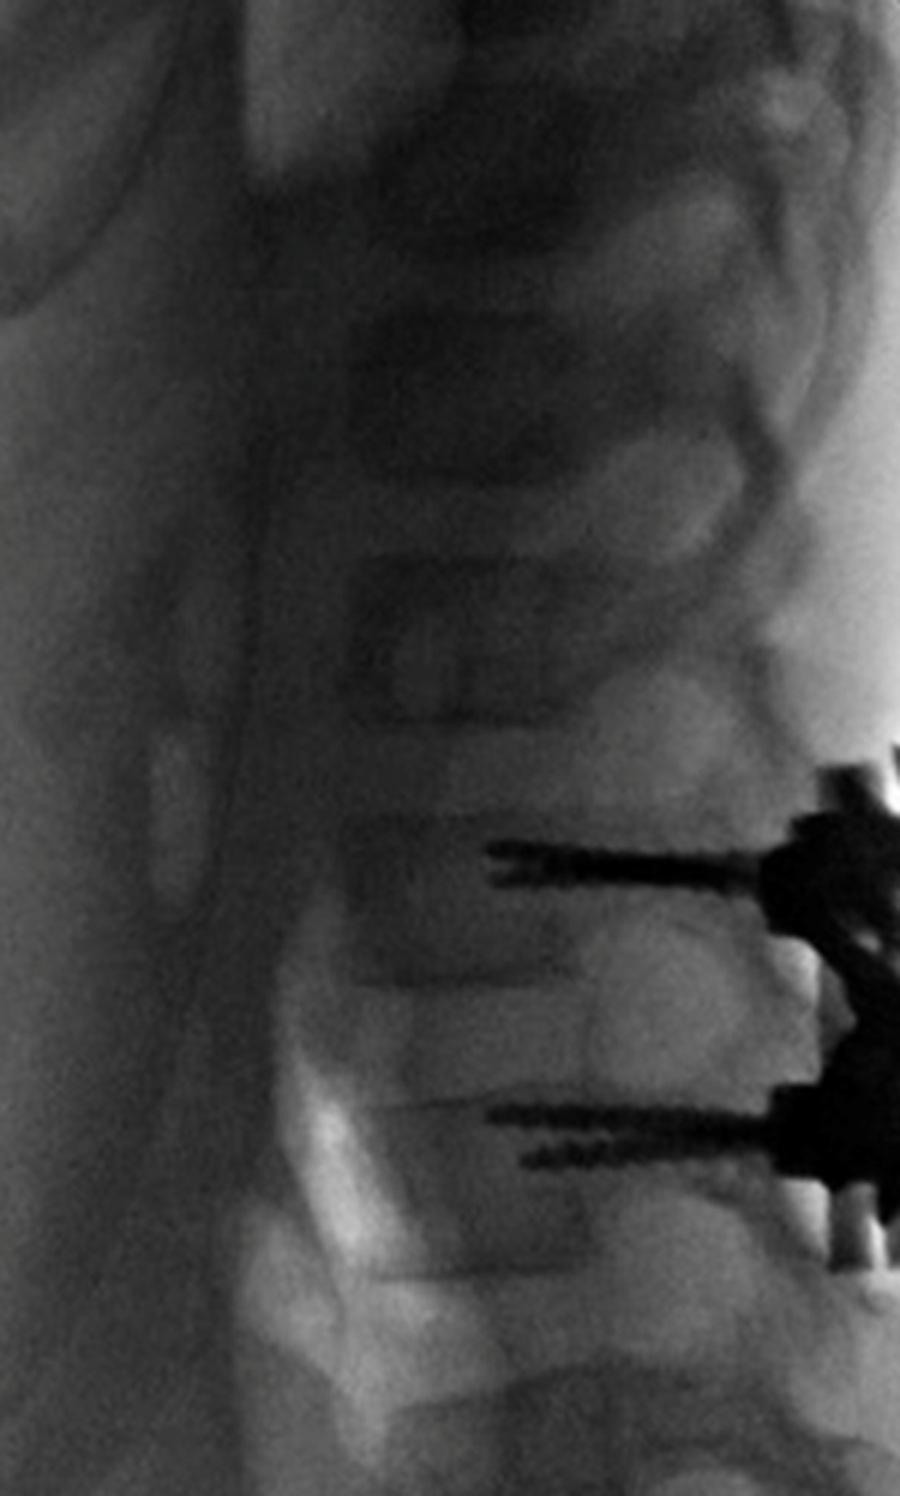 FIGURE 5: Intraoperative X-ray showing internal fixation and reduction of the facet